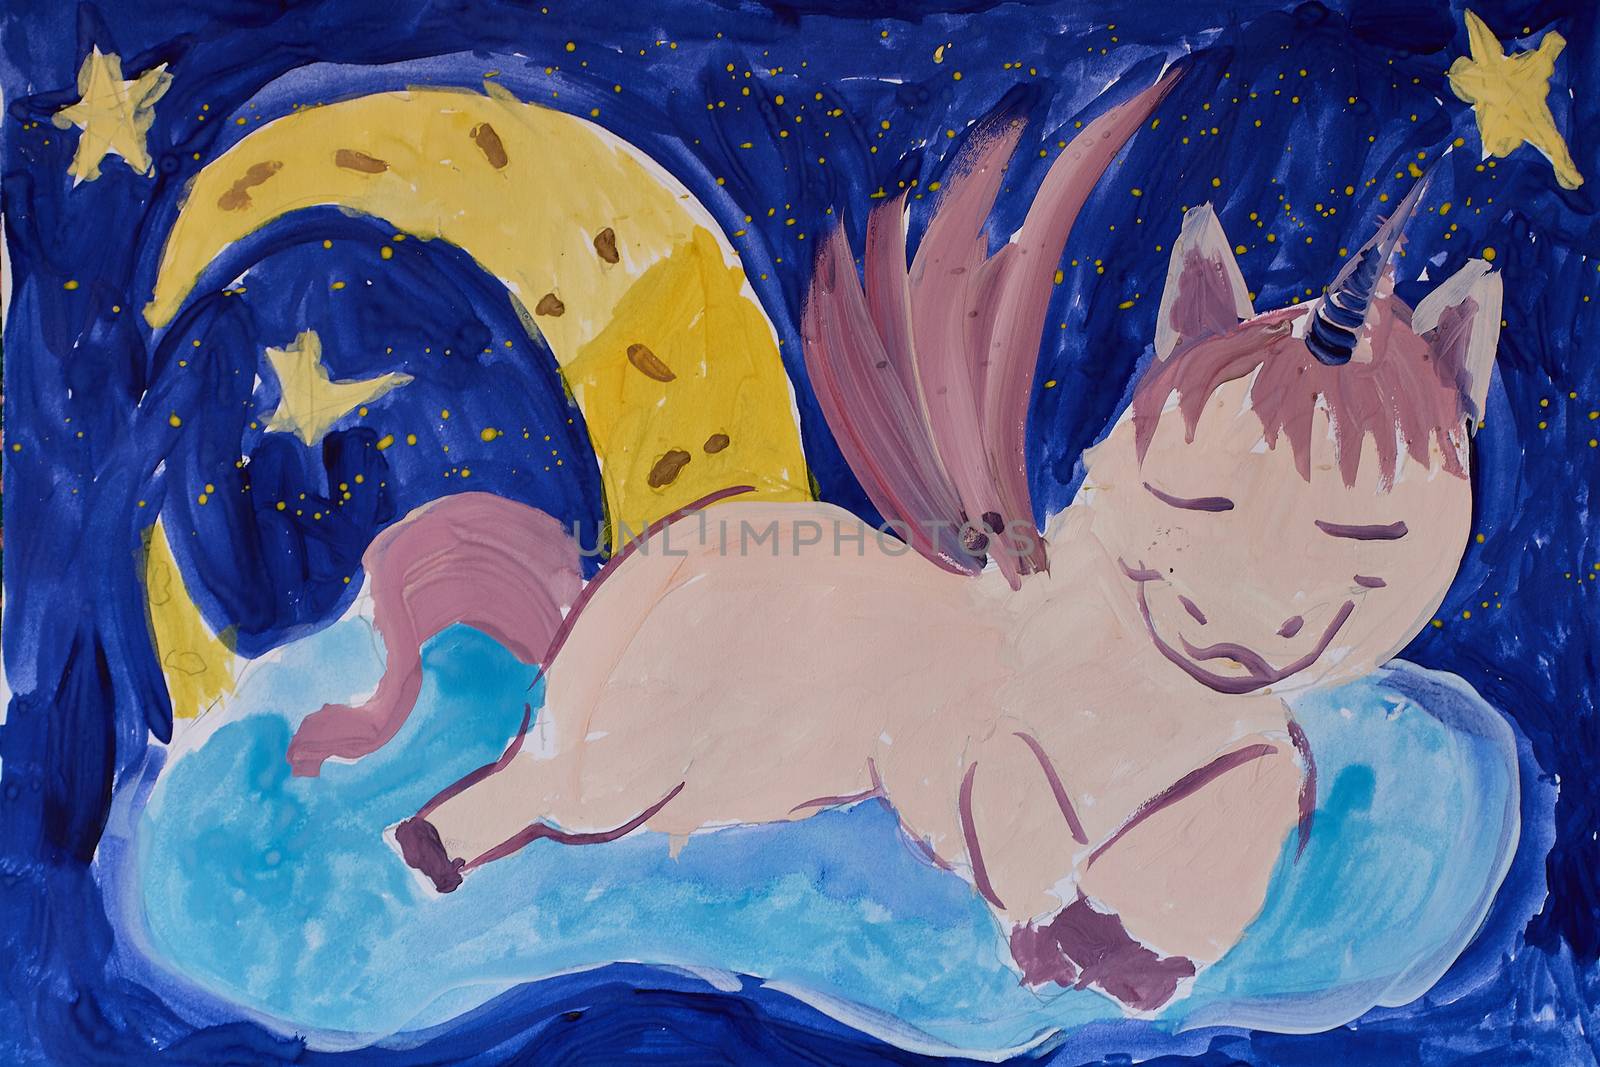 Hand made illustration of a sleeping unicorn on a cloud against the backdrop of a starry sky and a large moon.